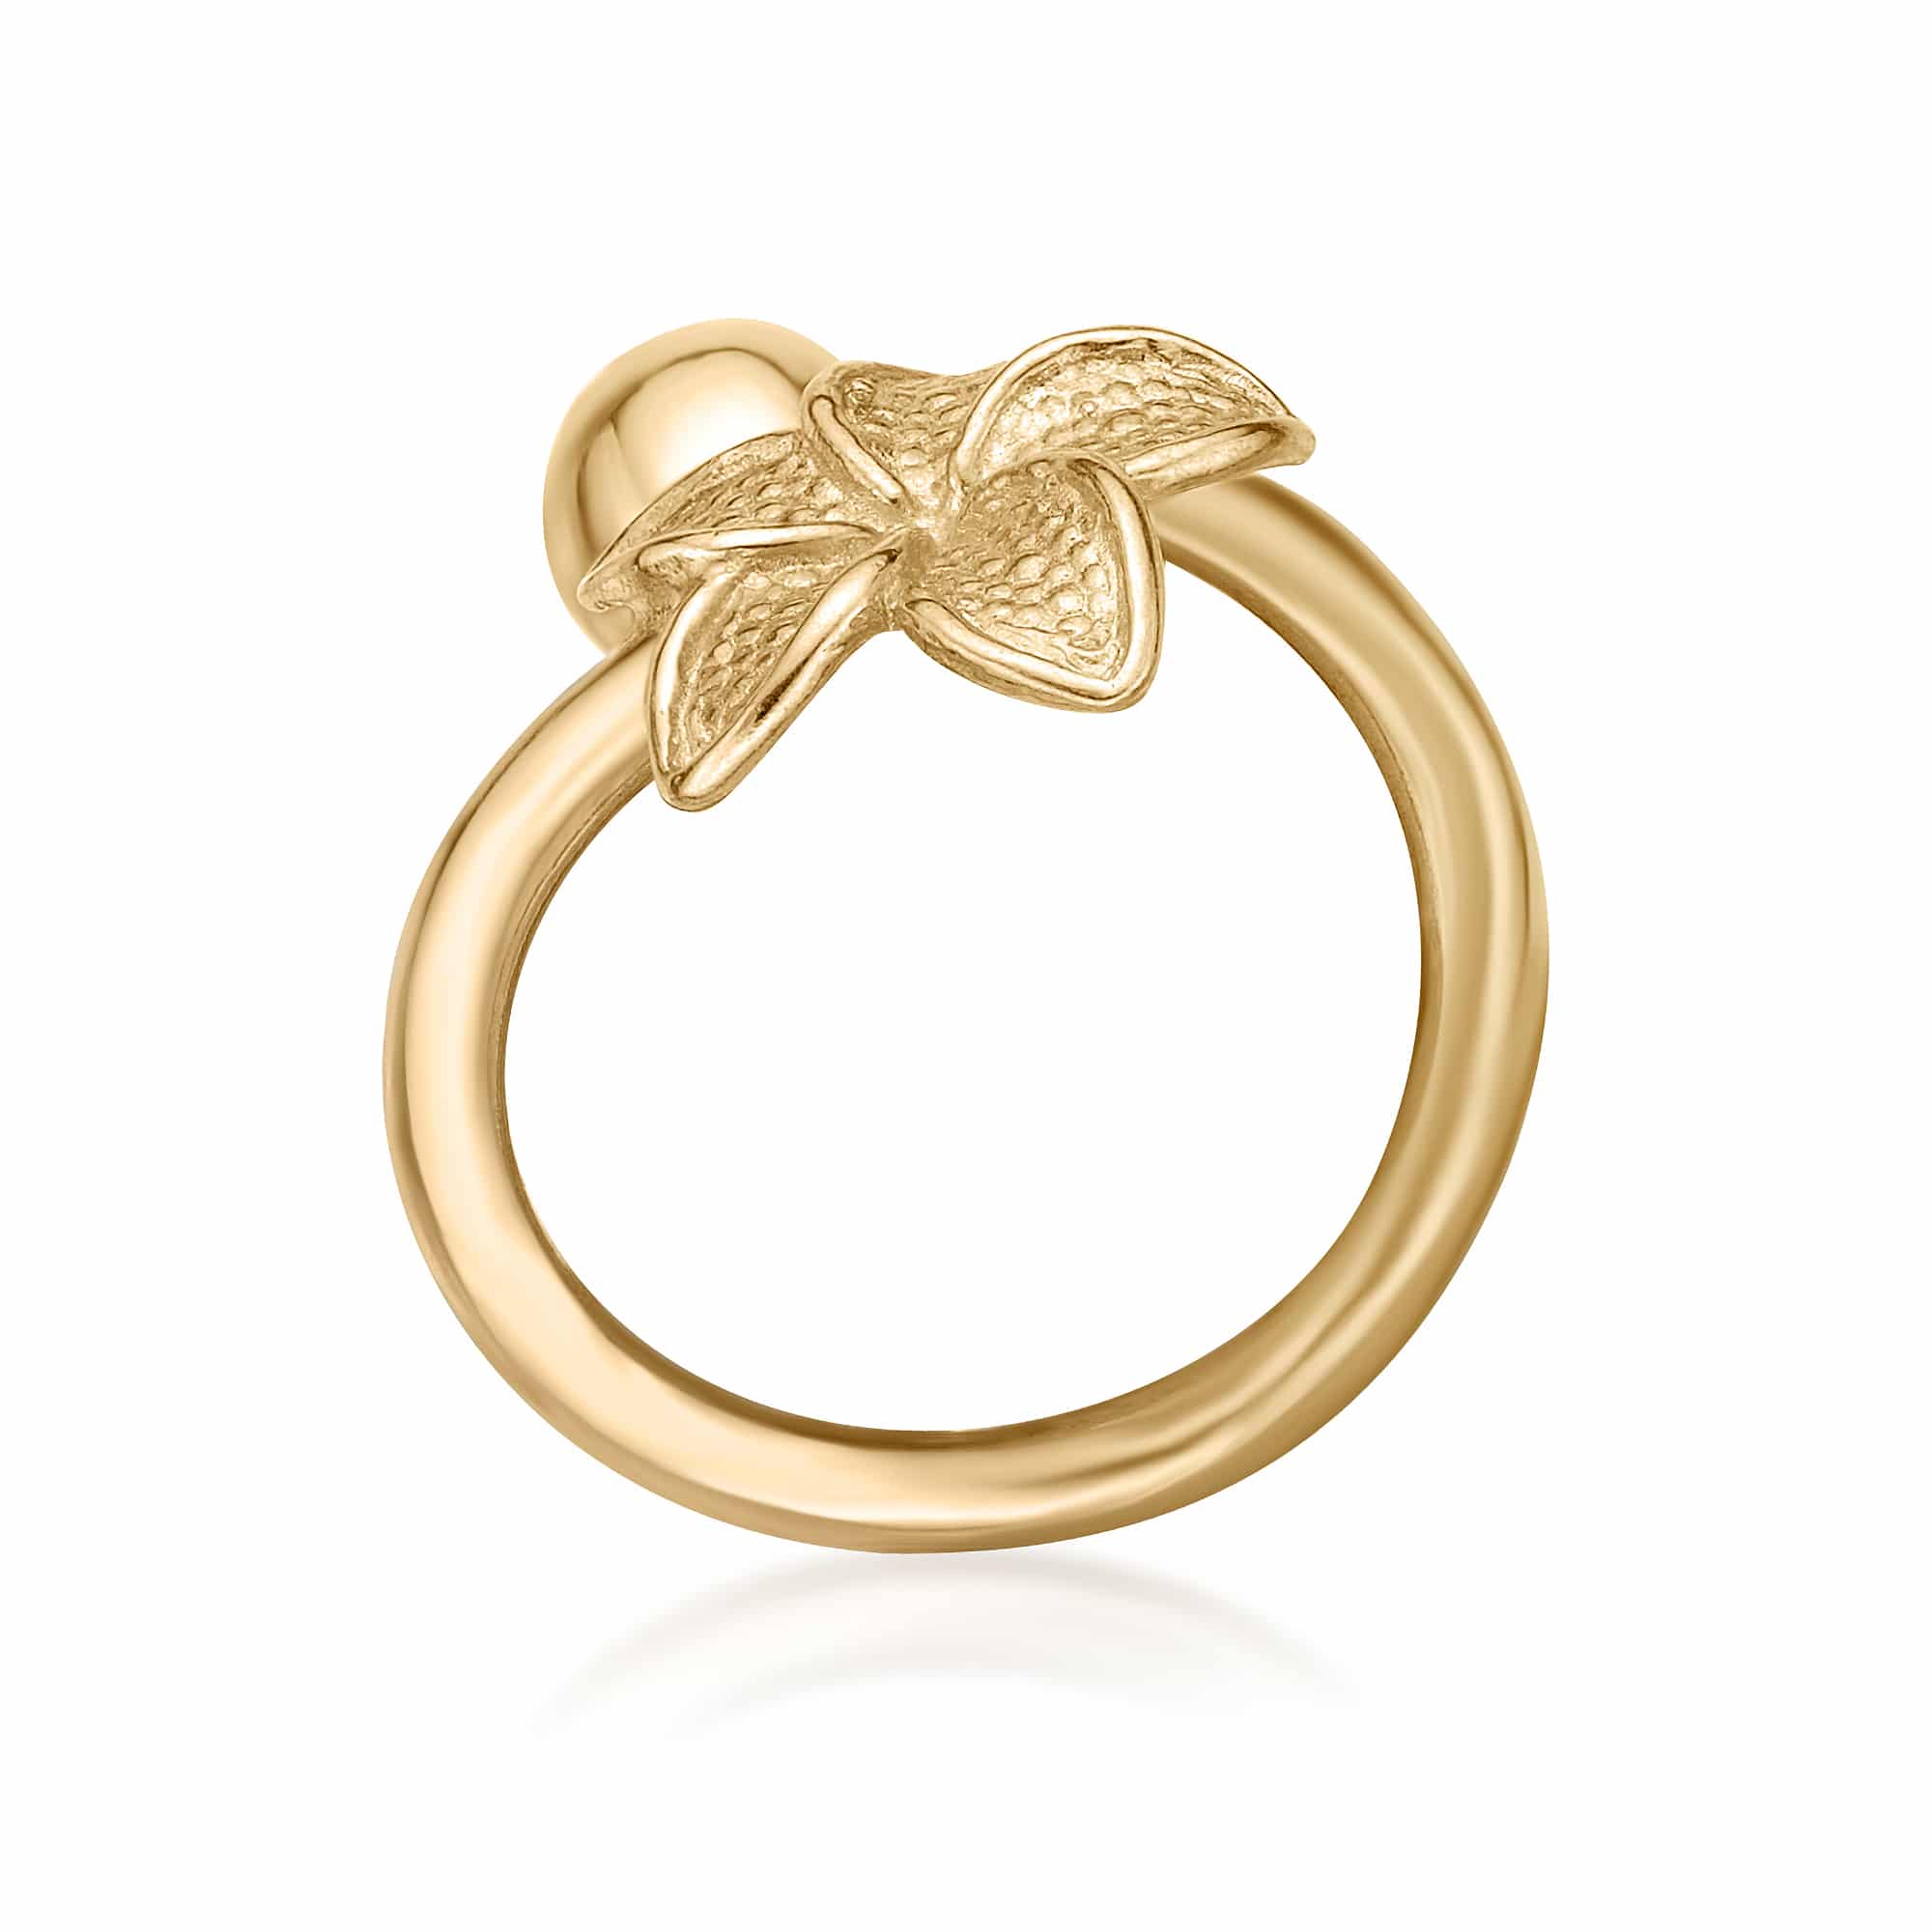 Rose gold rings for women | Four leaf clover ring rose gold with Diamo –  Indian Designs